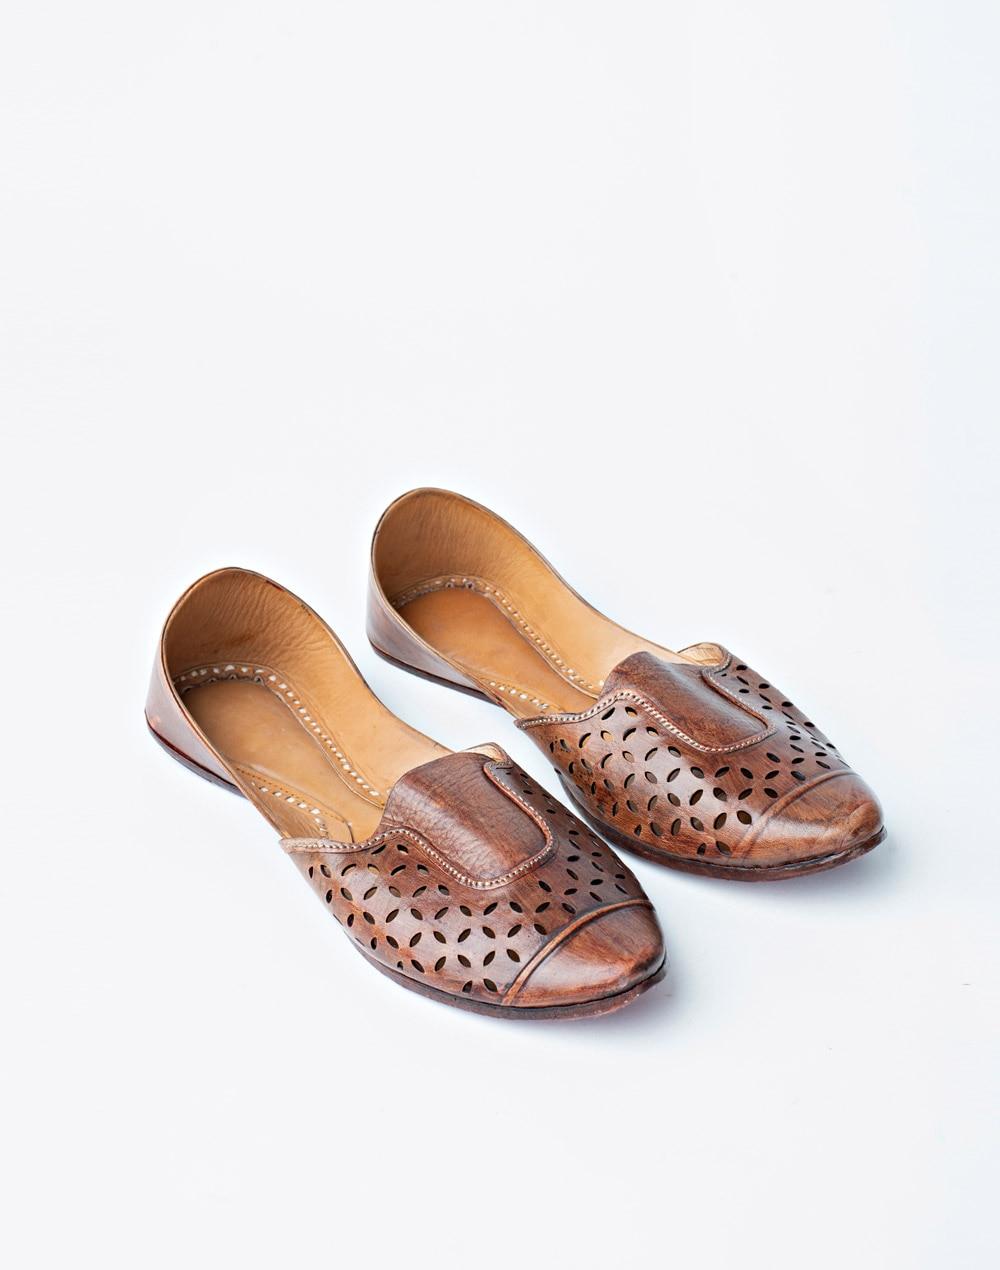 leather-perforated-juttie